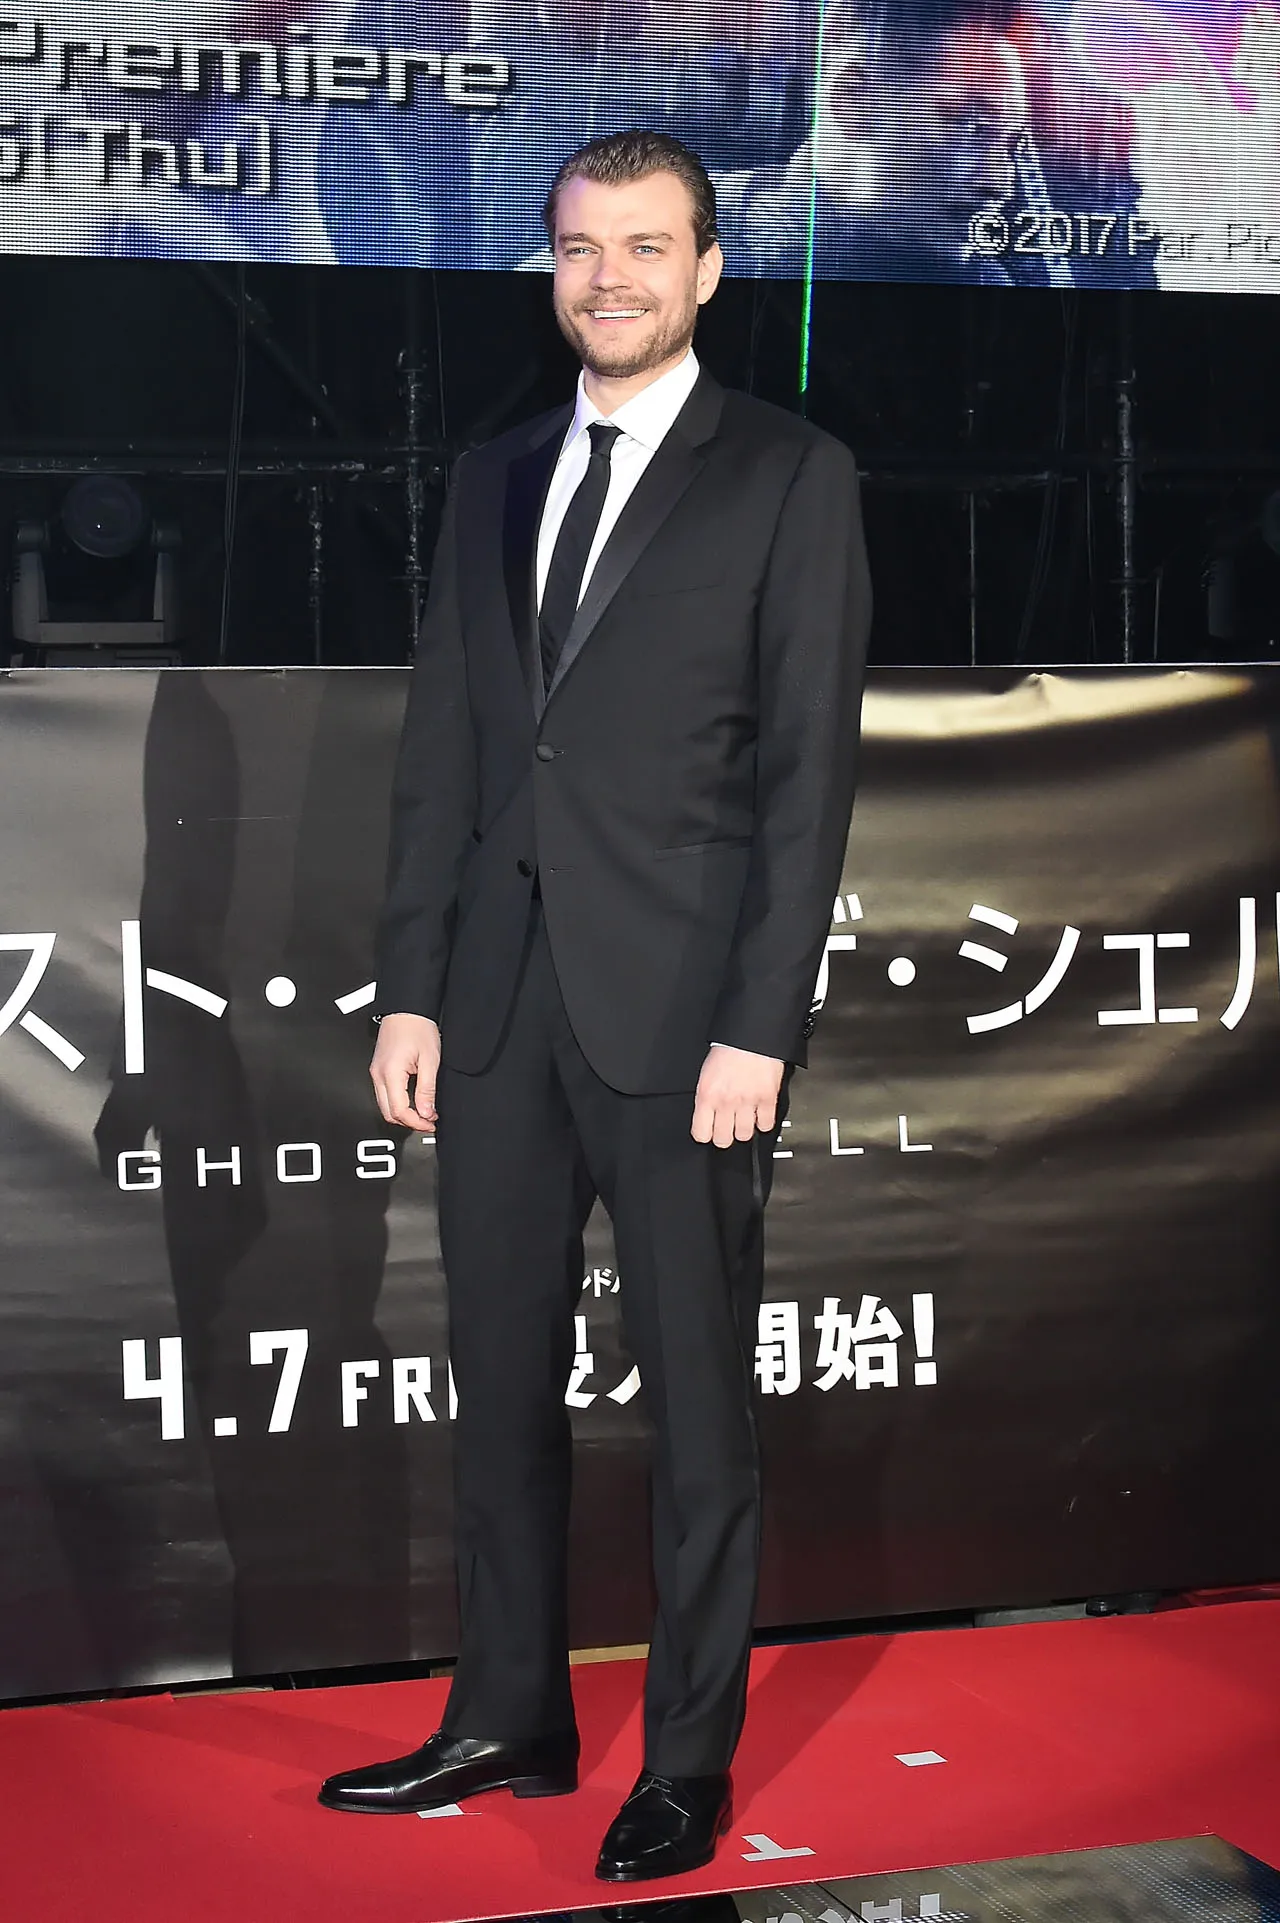 Ghost in the Shell Tokyo Premiere